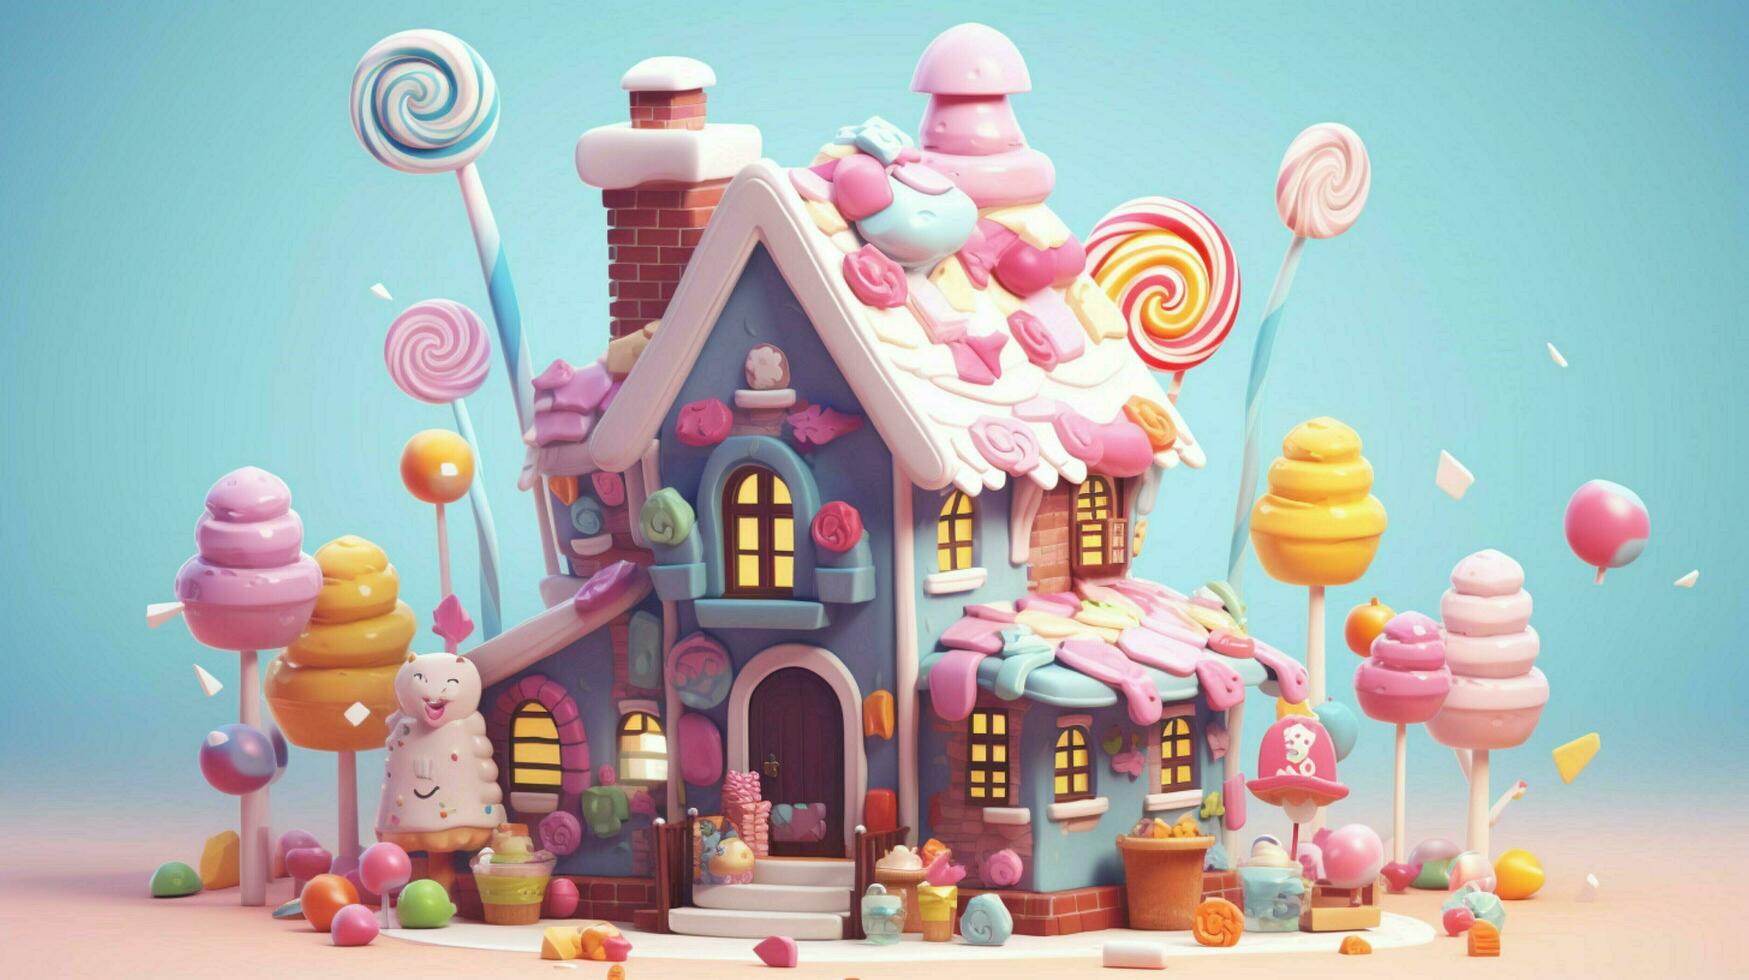 A fancy candy house with sweets and chocolate dessert photo